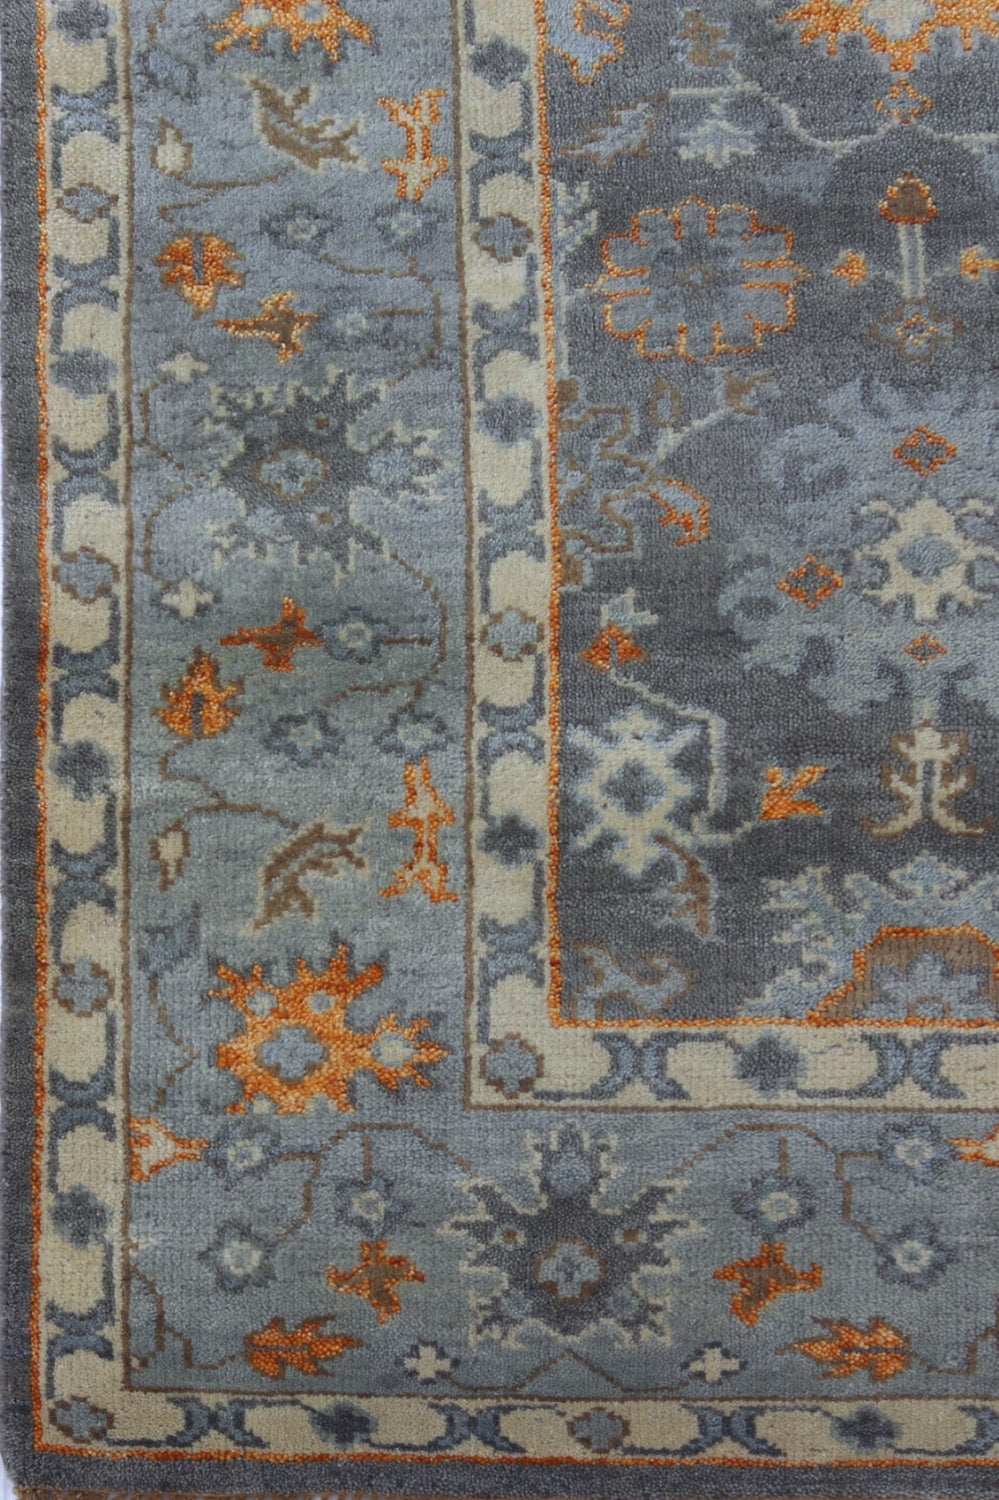 Sultanabad 7 Handwoven Traditional Rug, J71644